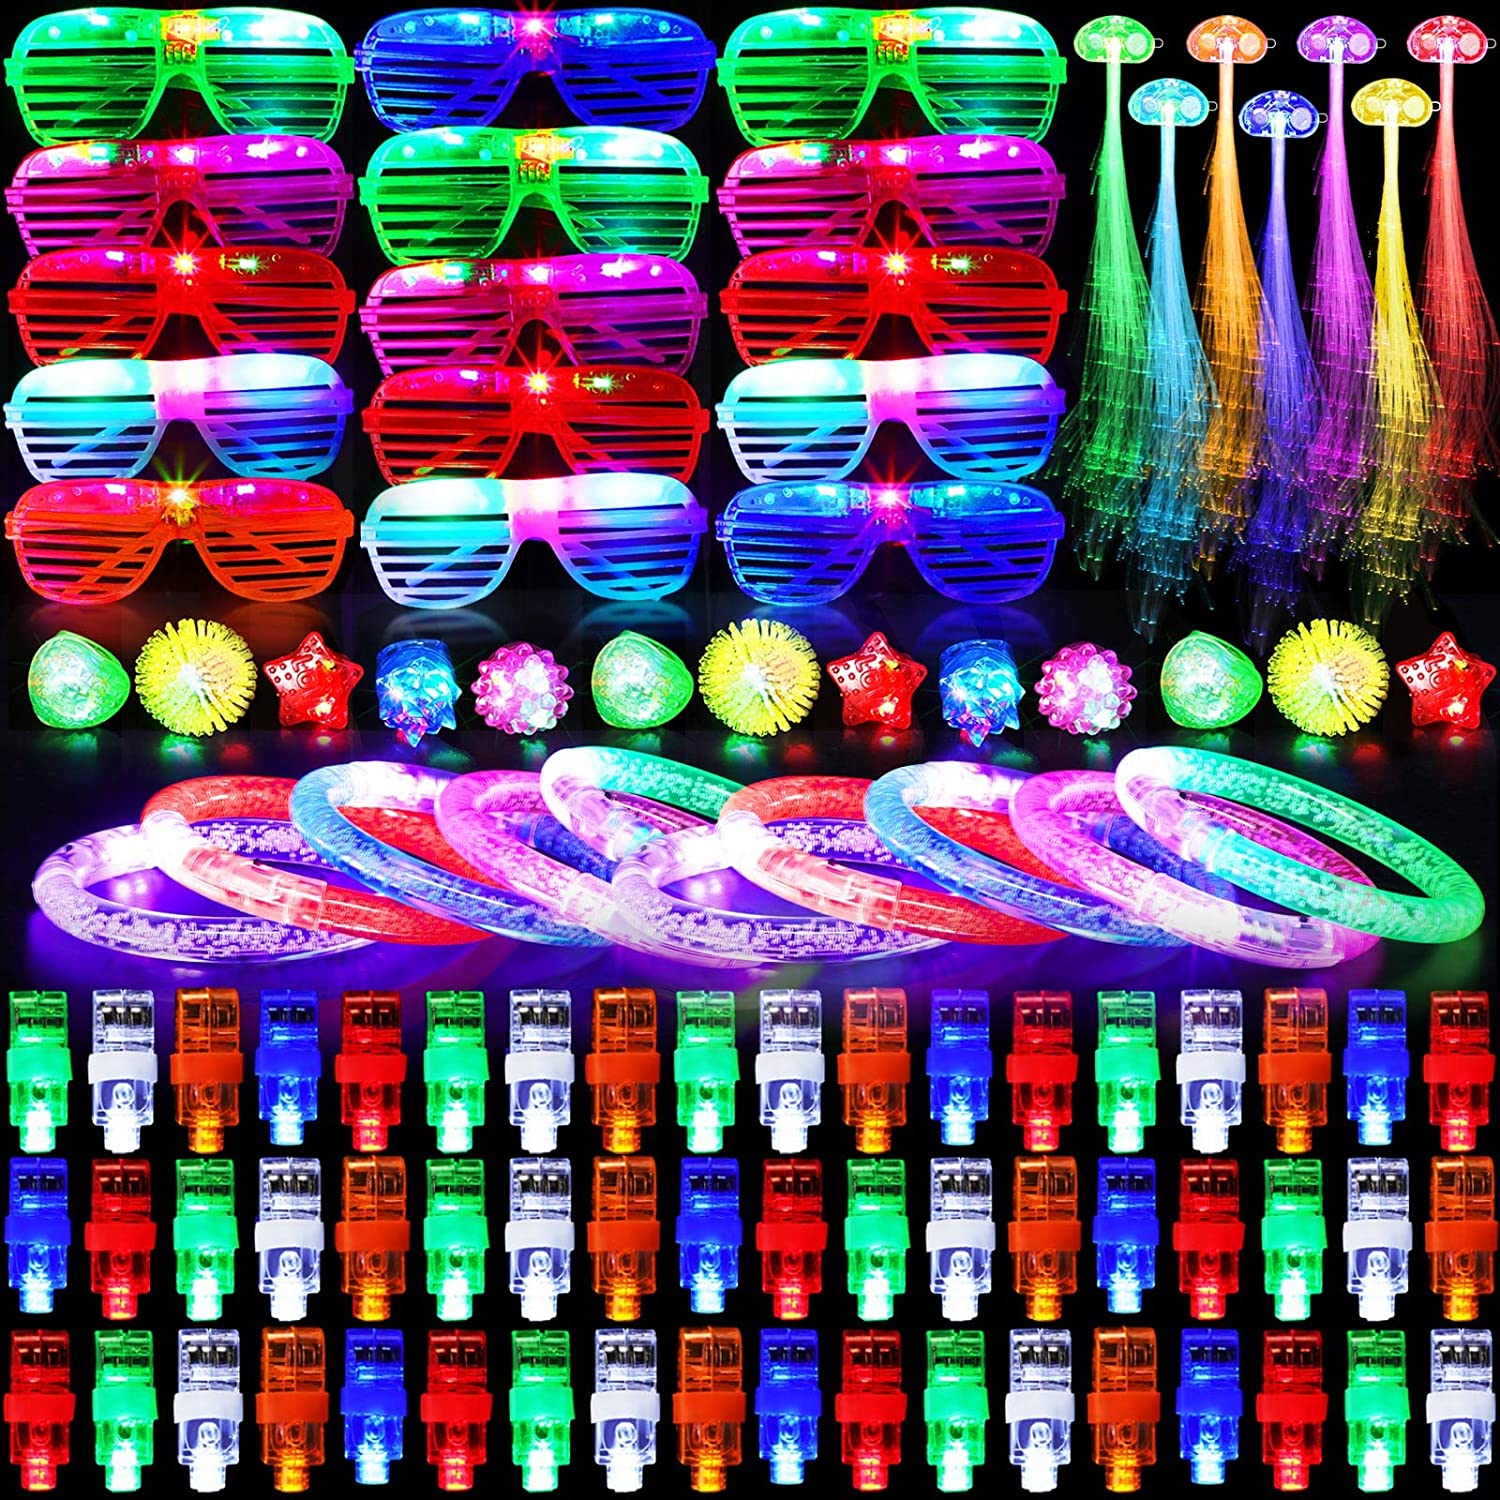 150 Packs LED Light Up Toy Party Favors Glow In The Dark Party Supplies -  100 Finger Lights 15 Jelly Ring 15 Glasses 10 Bracelet 10 Fiber Optic Hair  Light for Adult Kids Birthday Party 